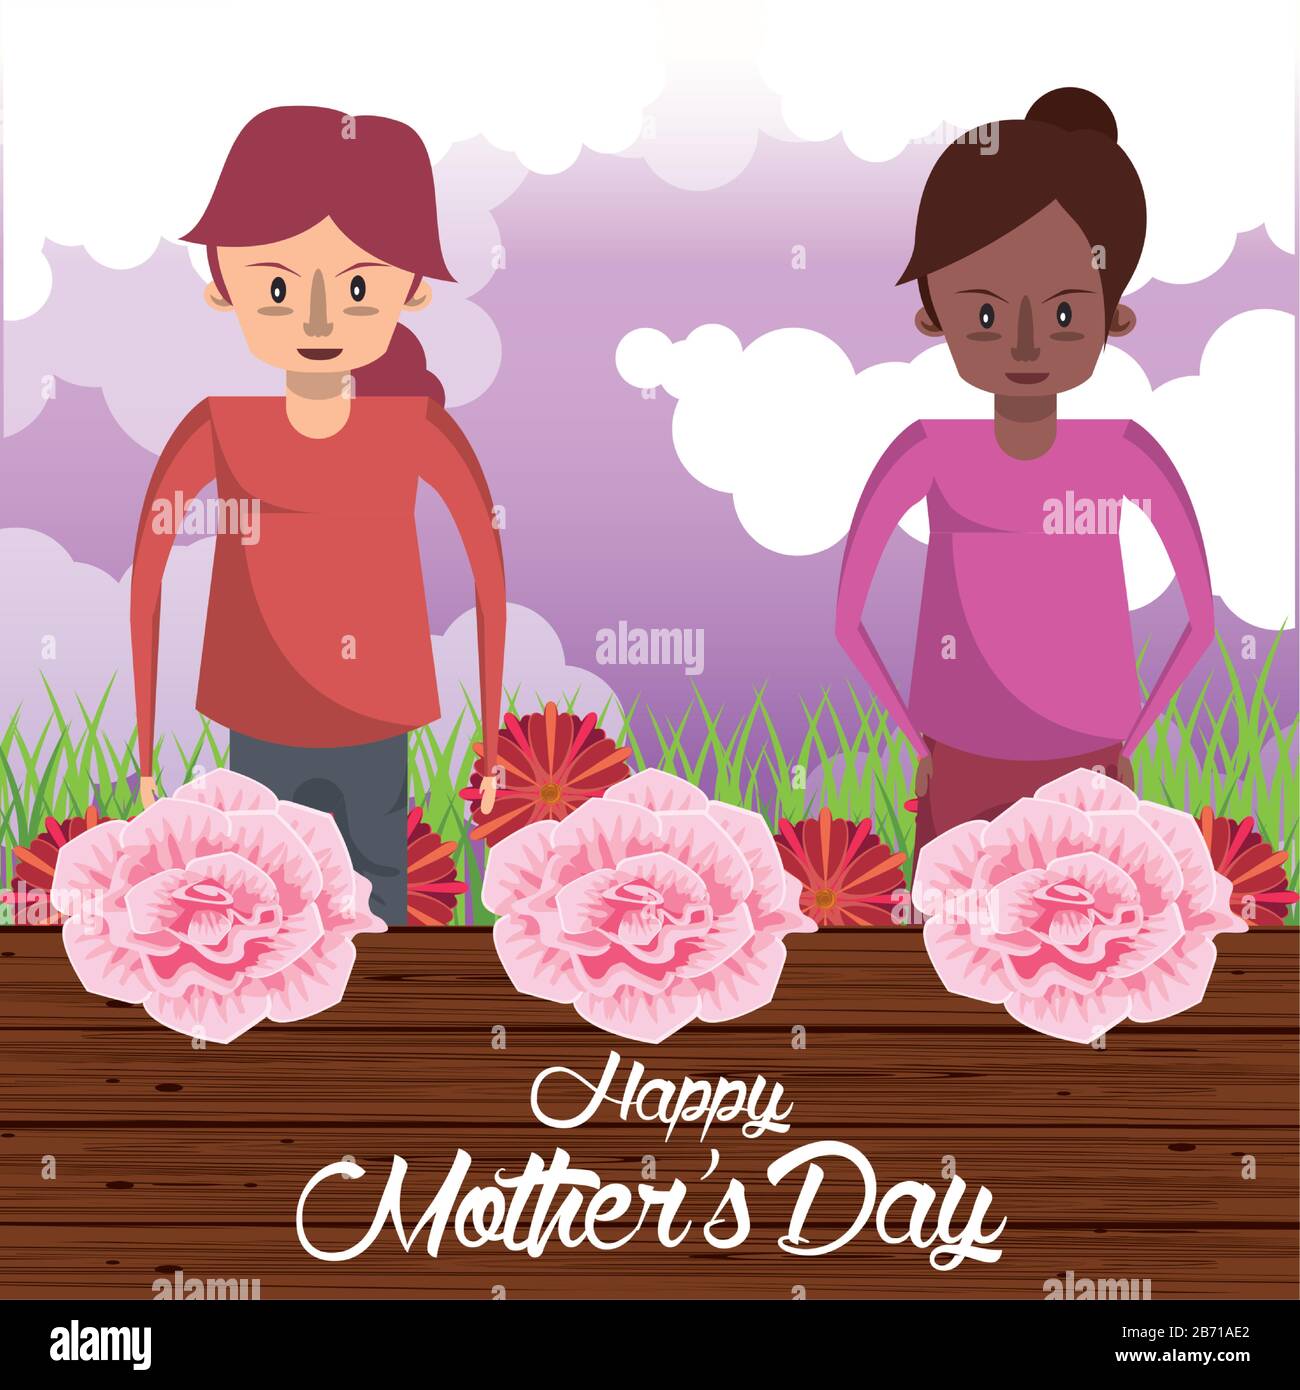 happy mothers day interracial